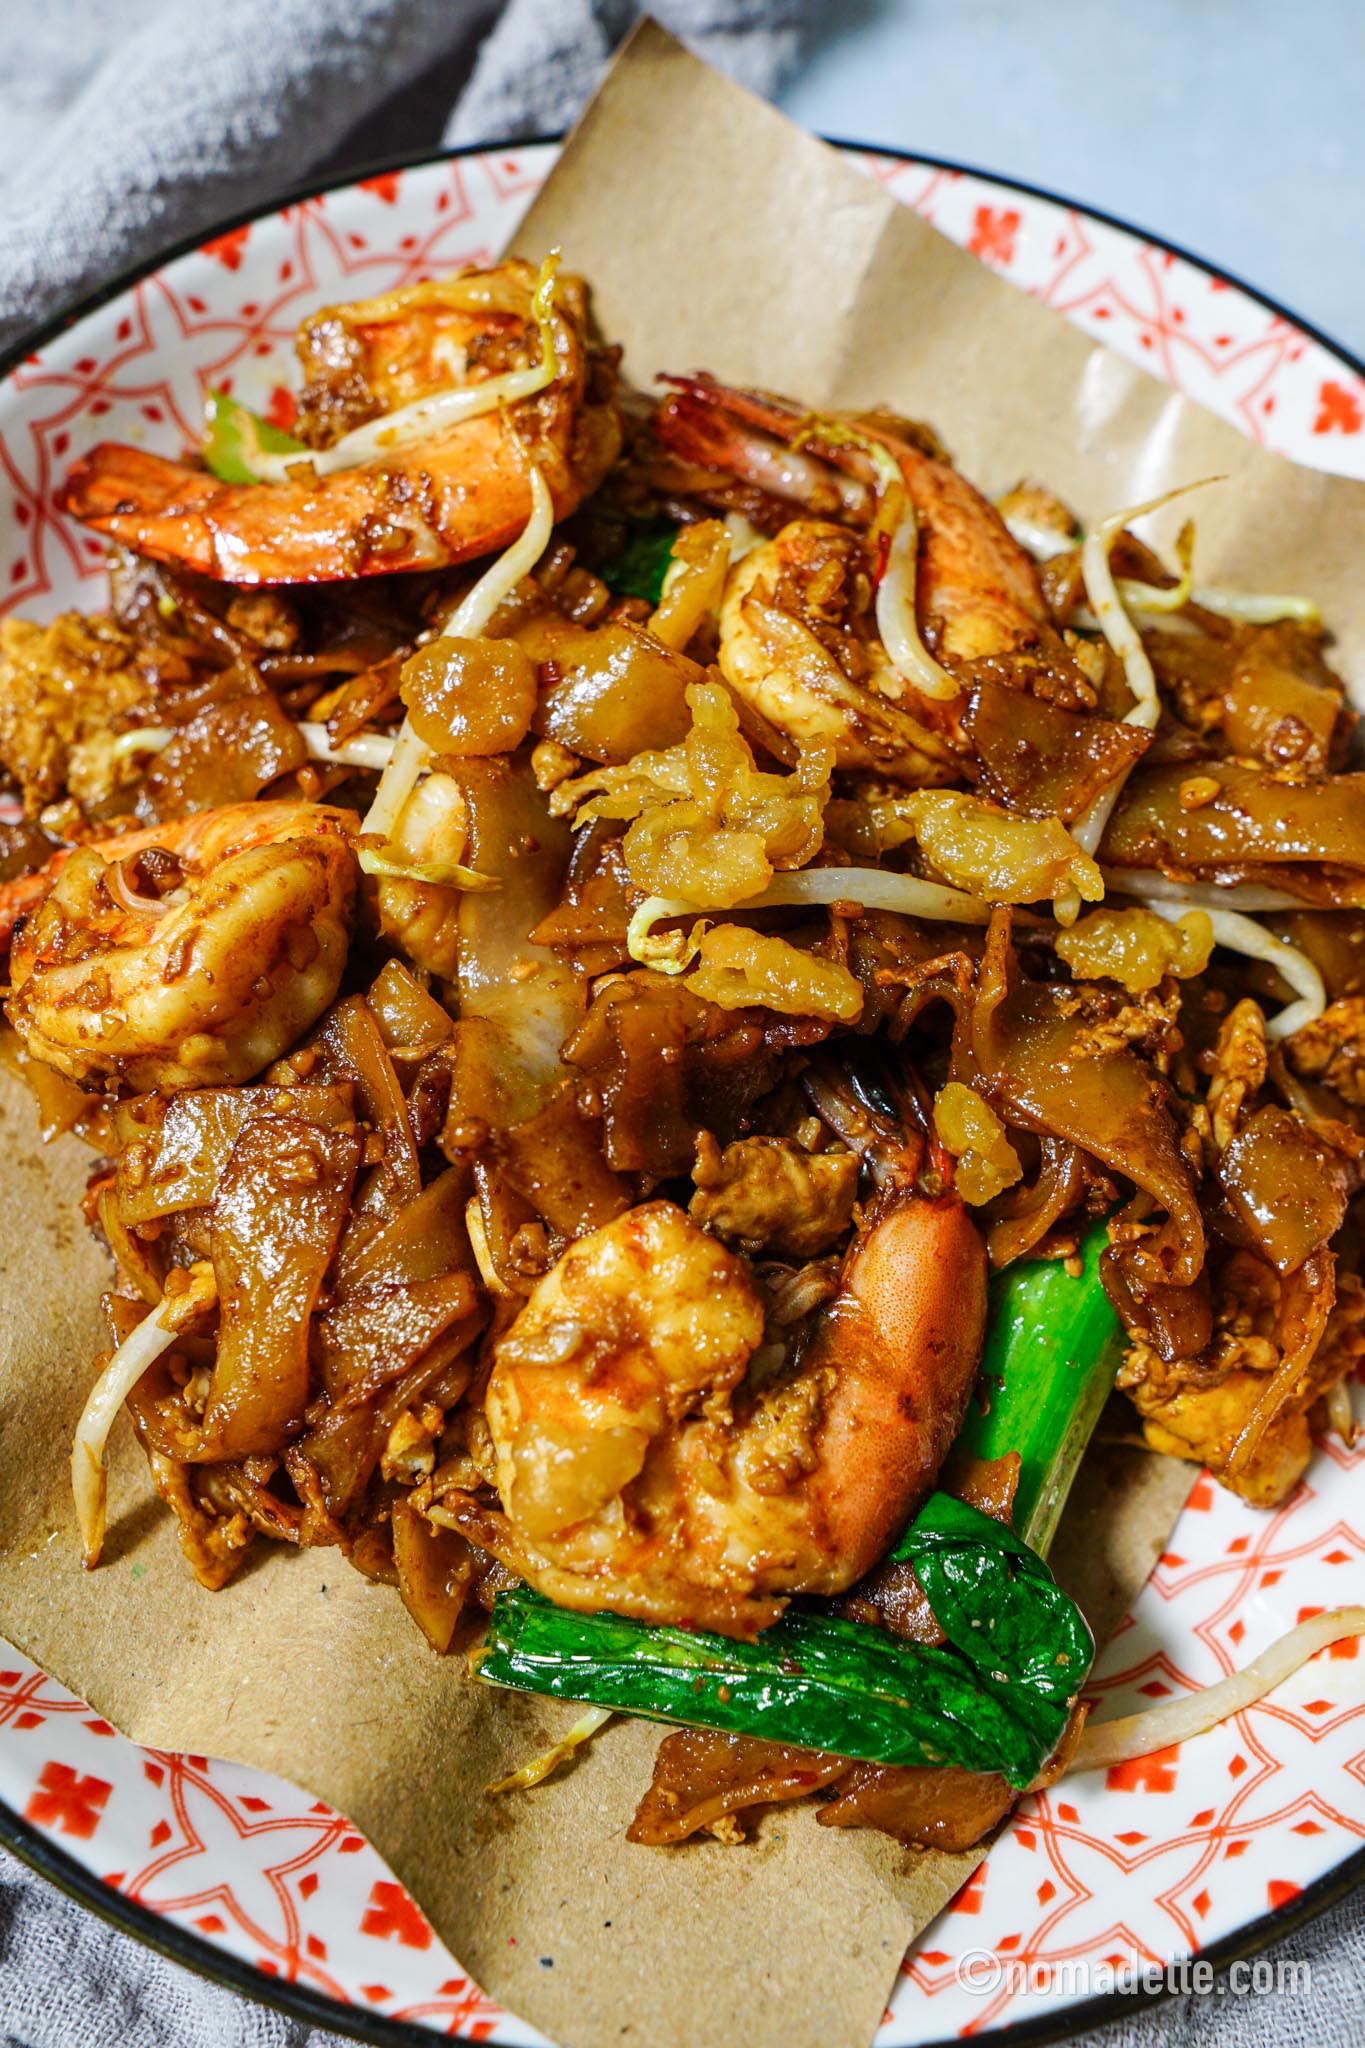 How to make Char Kway Teow